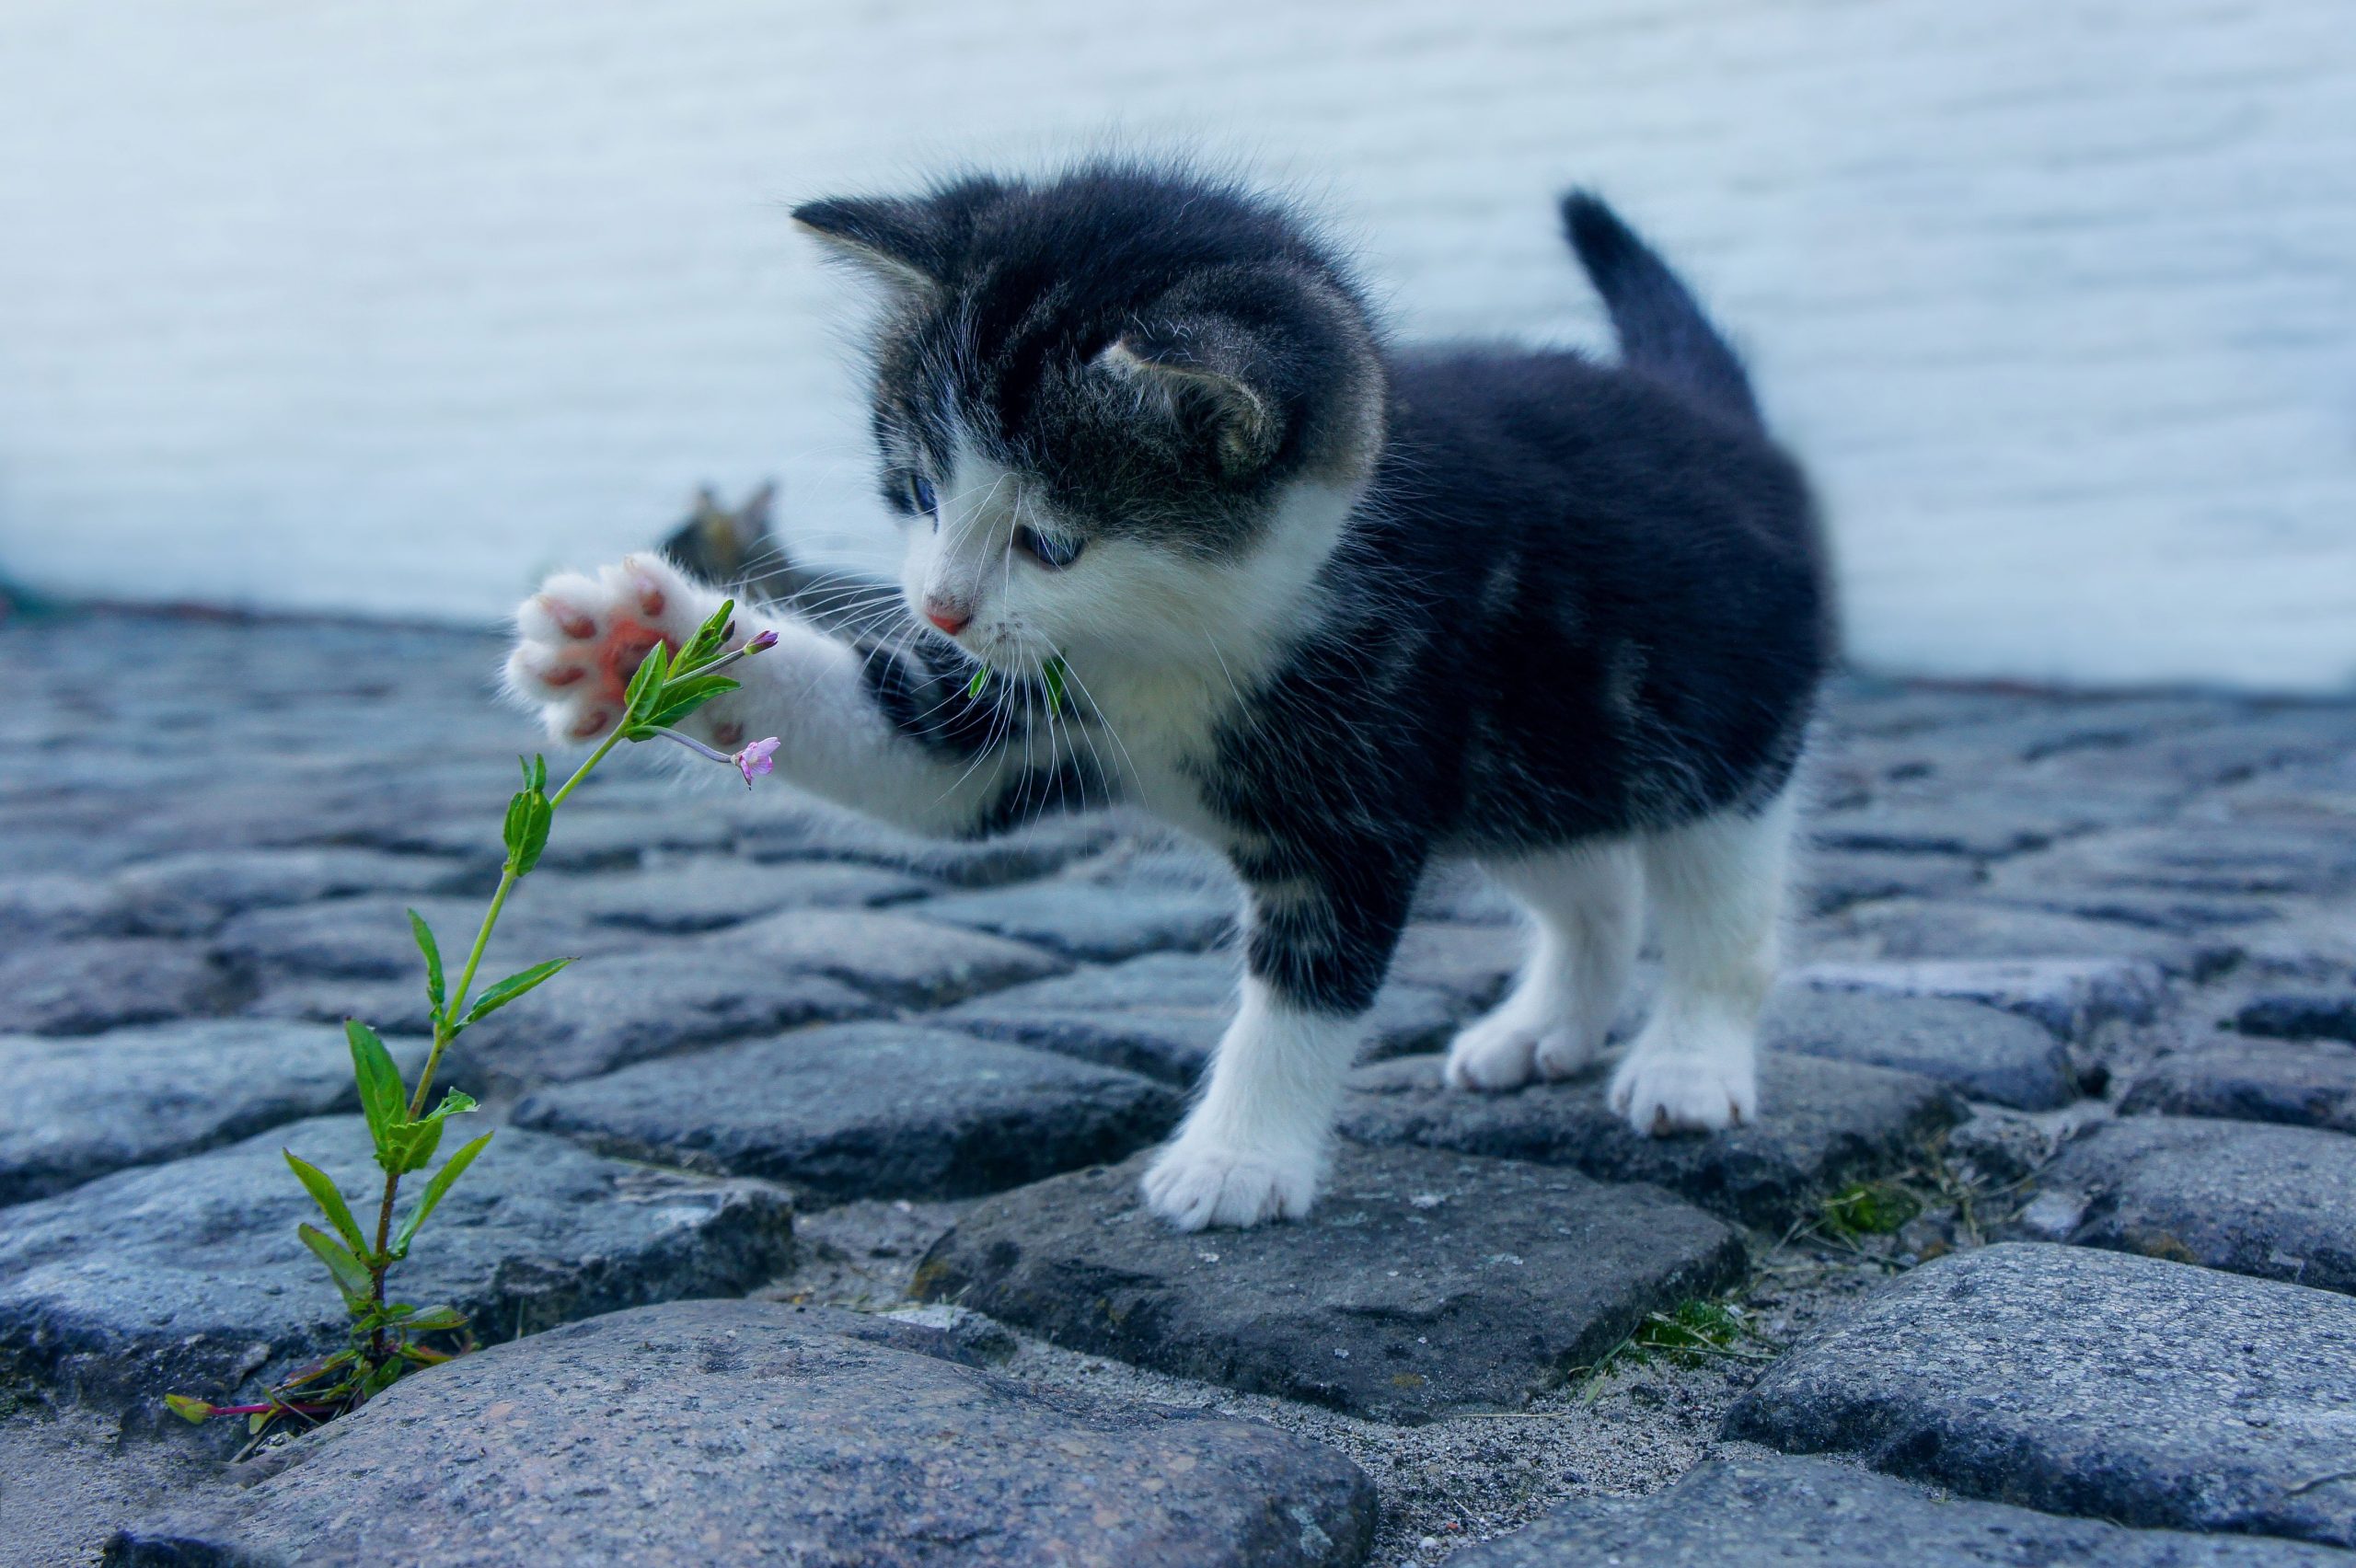 A kitten keenly observing a sapling and feeling it by gently touching it with its paw.